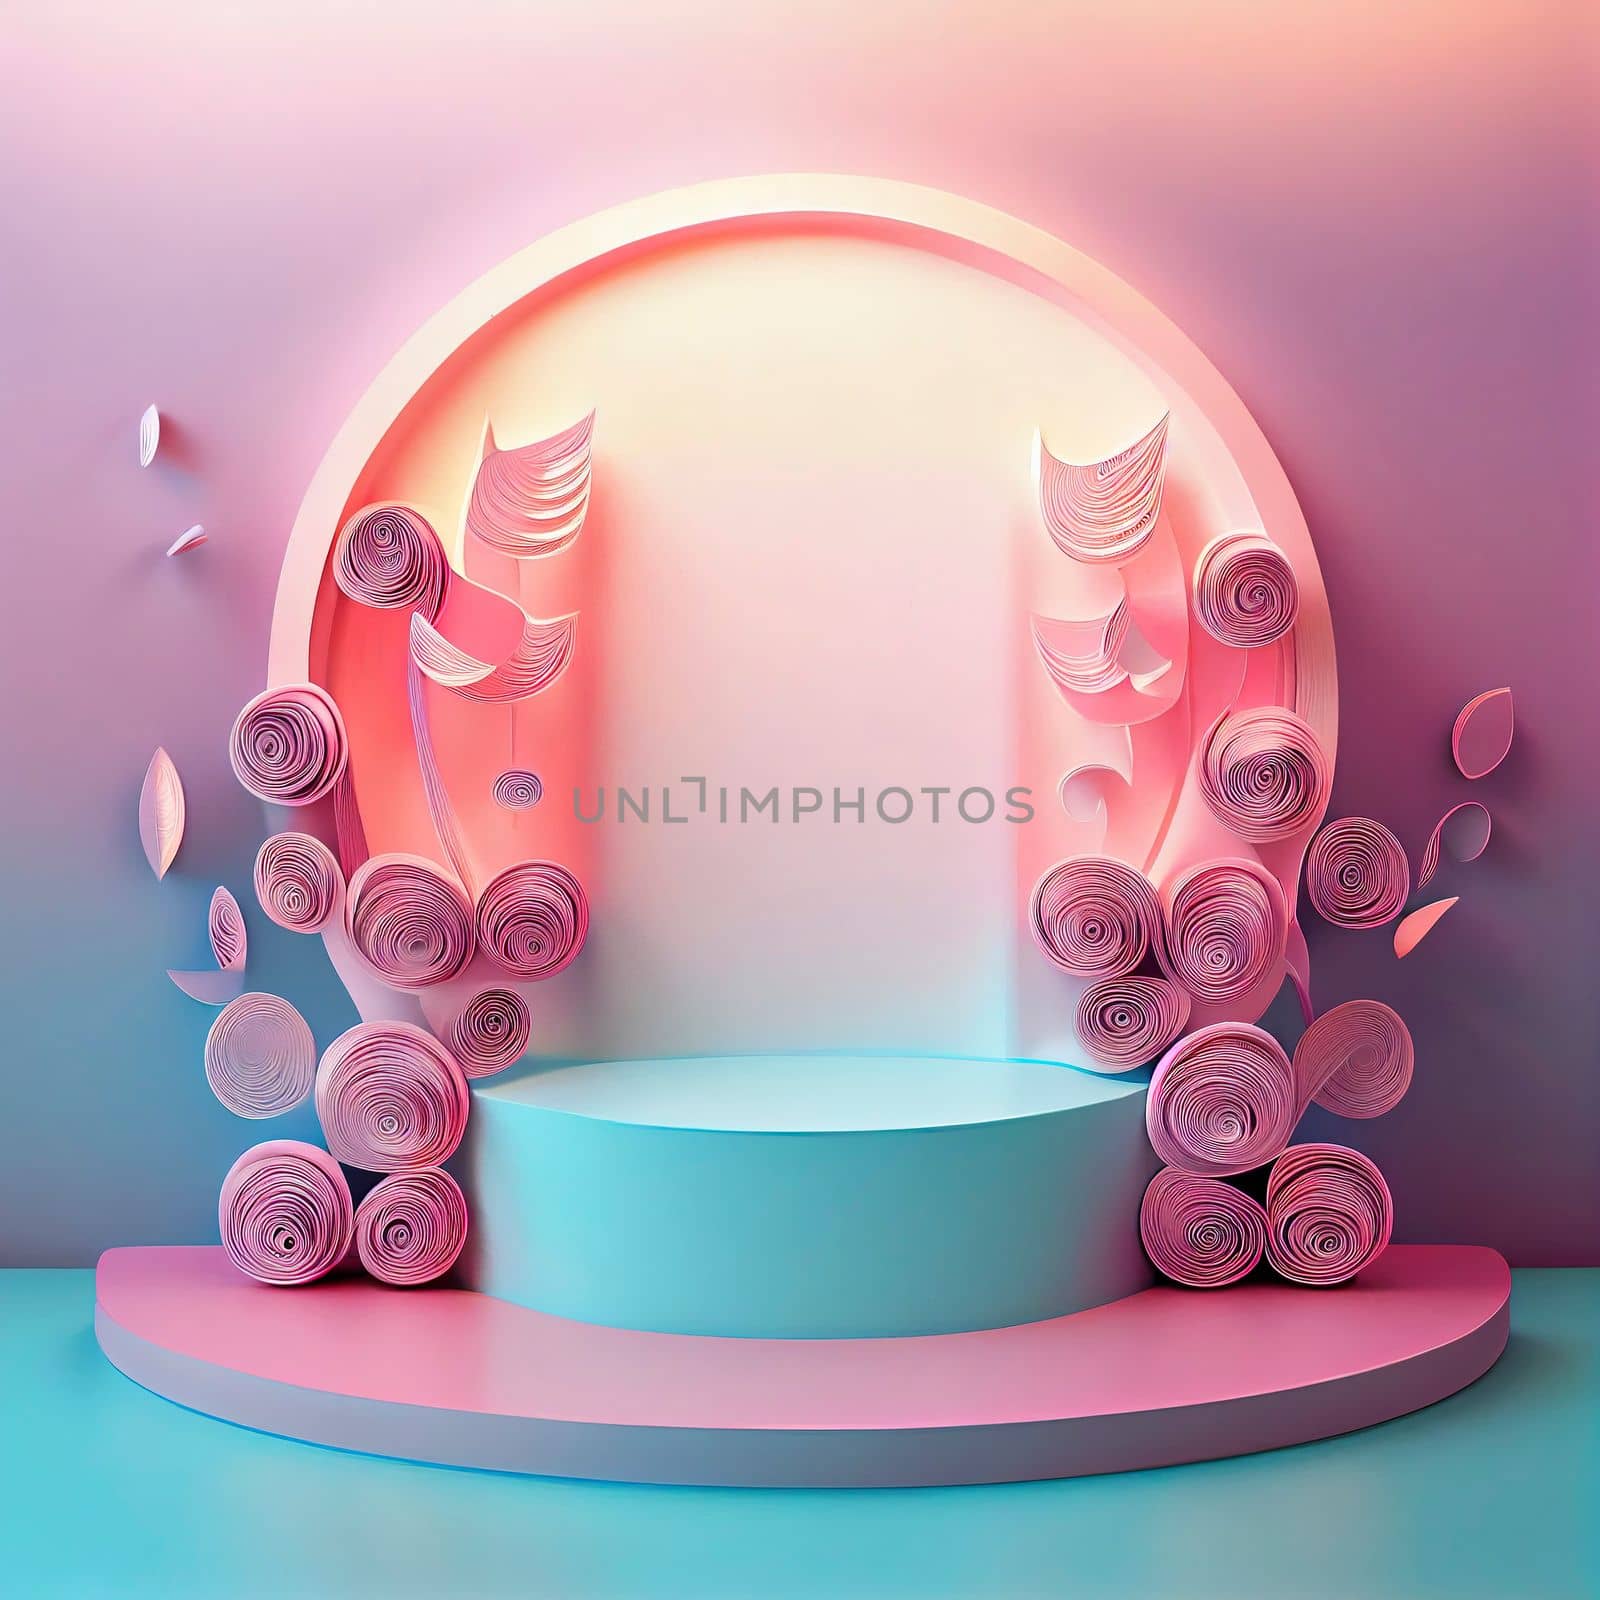 3d illustration of podium for display product with flowers by templator